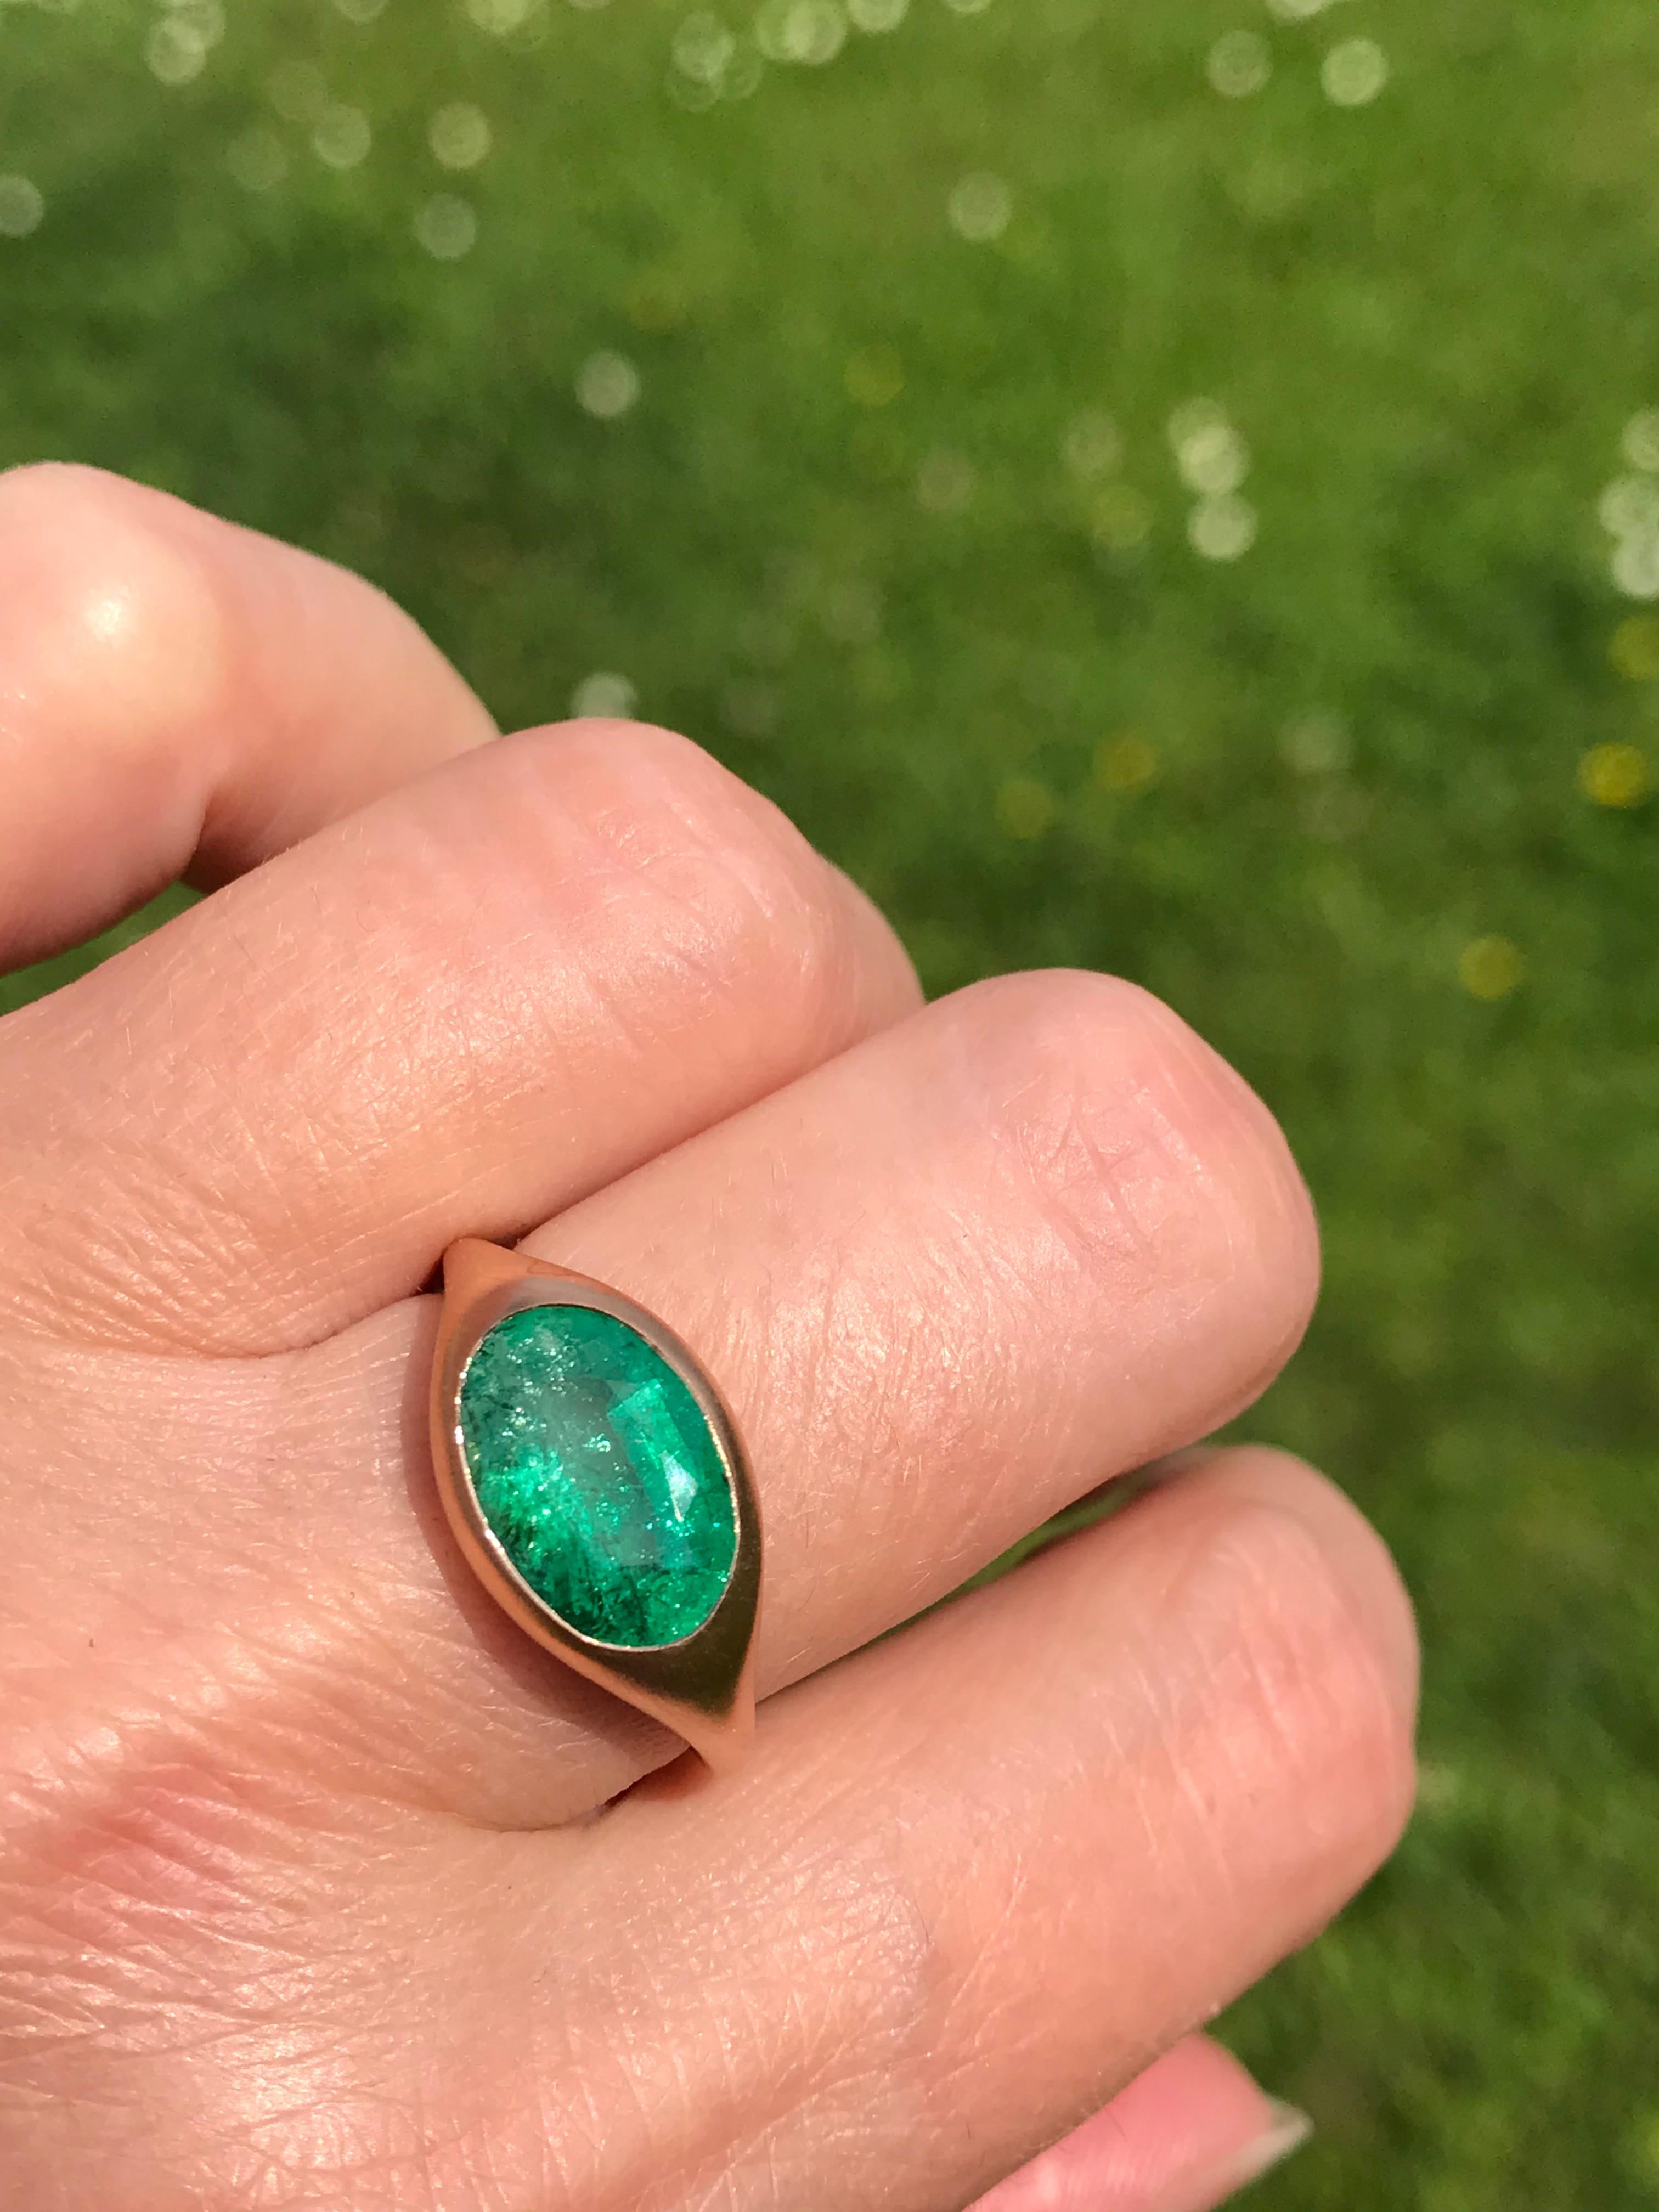 Dalben design One of a Kind 18k rose gold matte finishing ring with a 3,16 carat bezel-set oval faceted cut emerald. 
Ring size 7 1/4 USA - EU 55 re-sizable to most finger sizes. 
Bezel stone dimensions :
height 10 mm
width 14,6 mm
The ring has been